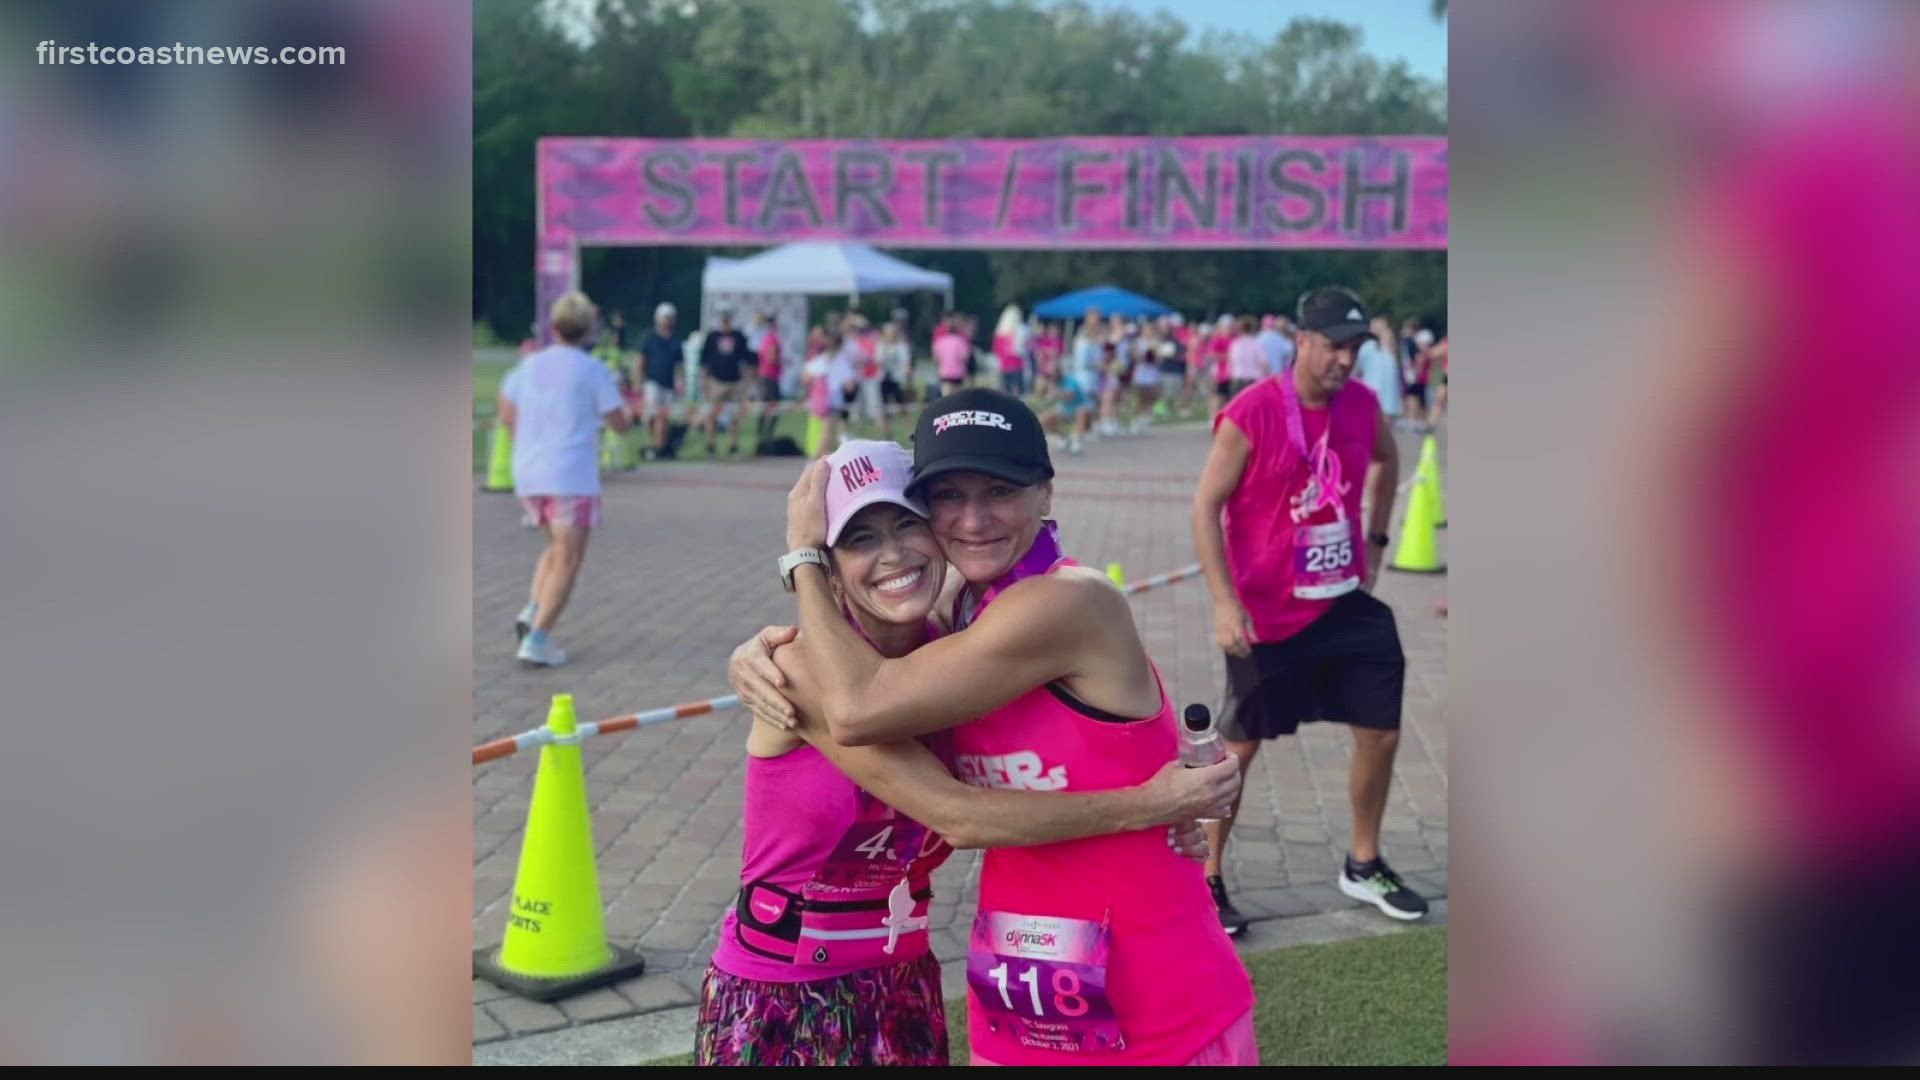 "I’ve always wanted to run with my patients but I wasn’t physically able to," said cancer survivor Dawn Mussallem.